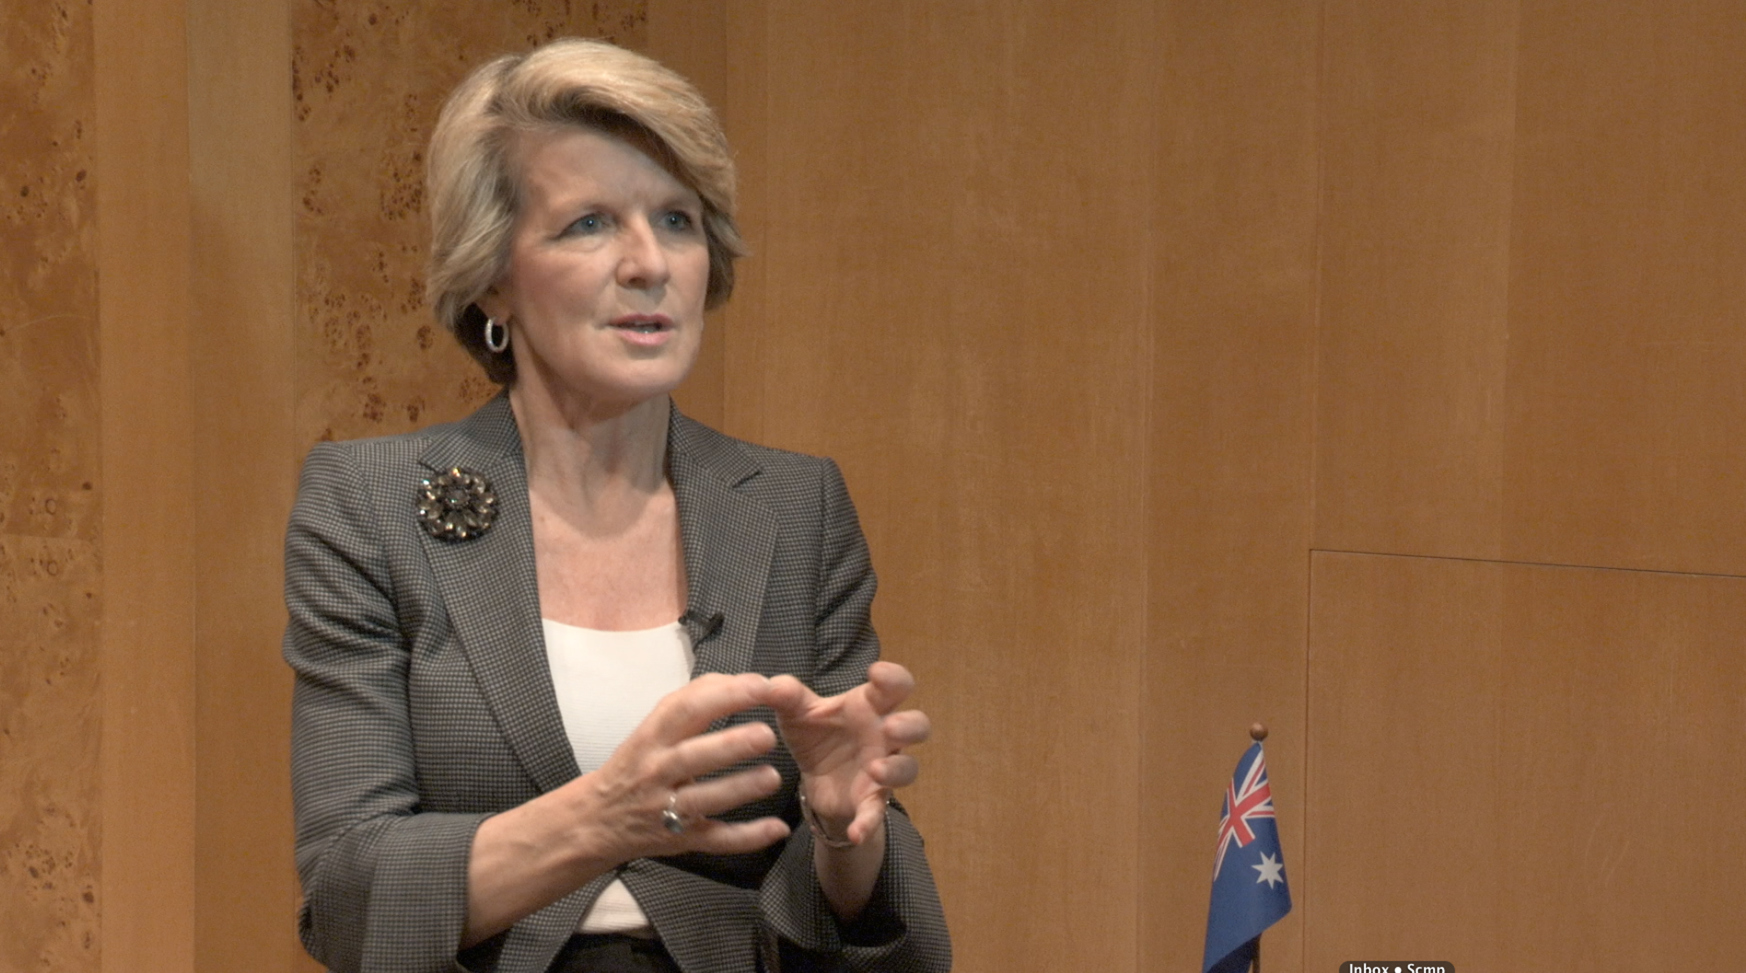 Australia's Foreign Minister Julie Bishop. Photo: SCMP Pictures